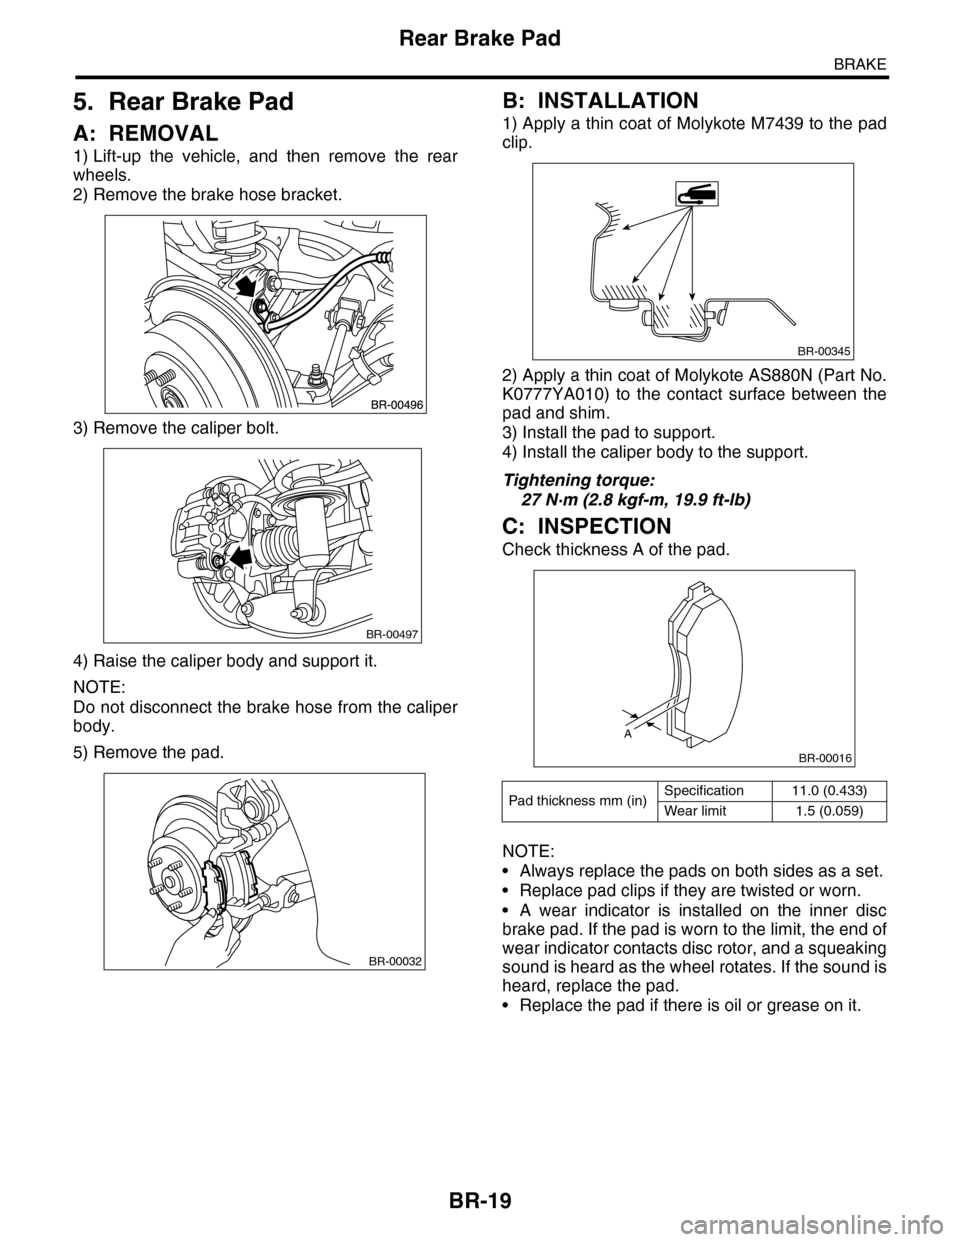 SUBARU TRIBECA 2009 1.G Service Workshop Manual BR-19
Rear Brake Pad
BRAKE
5. Rear Brake Pad
A: REMOVAL
1) Lift-up  the  vehicle,  and  then  remove  the  rear
wheels.
2) Remove the brake hose bracket.
3) Remove the caliper bolt.
4) Raise the calip